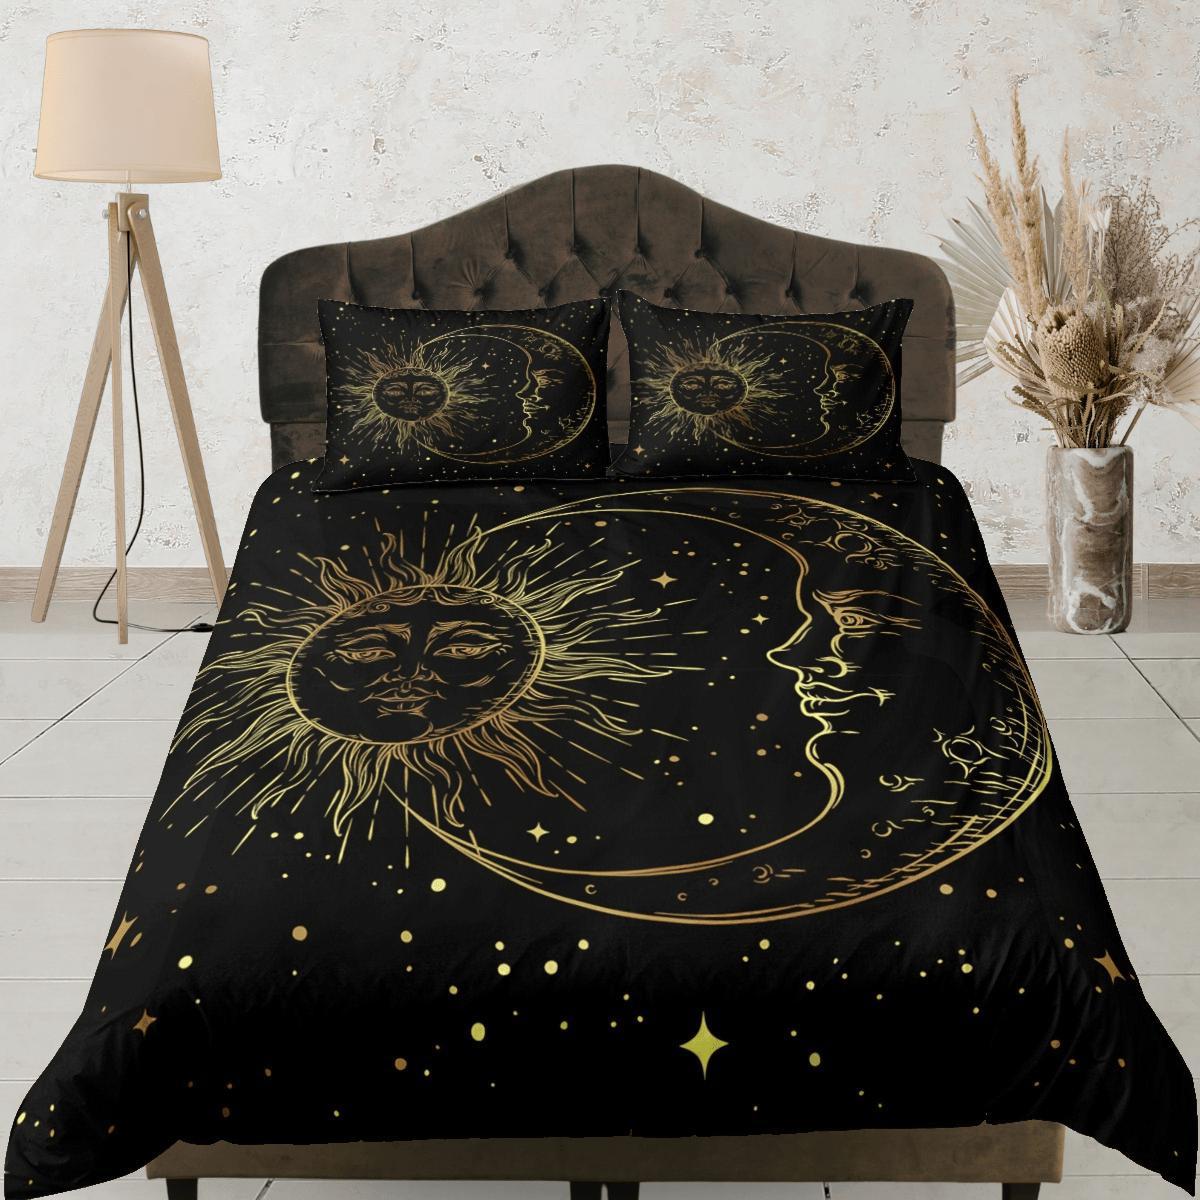 daintyduvet Moon Tarot Black Duvet Cover Colorful Dorm Bedding Set Full, Wiccan Sun and Moon Gothic